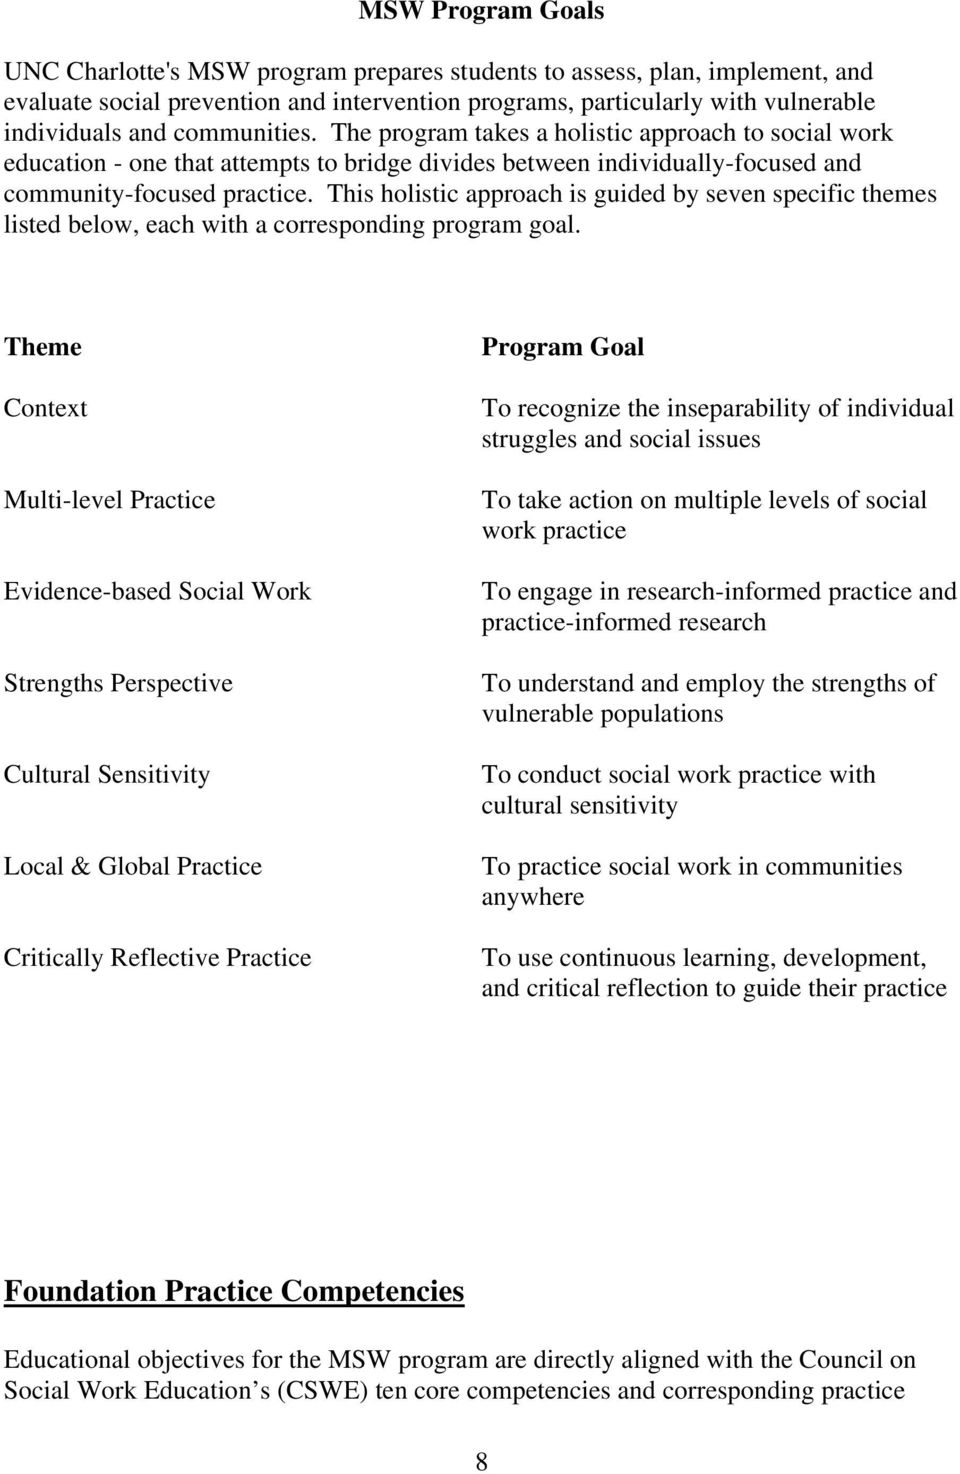 This holistic approach is guided by seven specific themes listed below, each with a corresponding program goal.